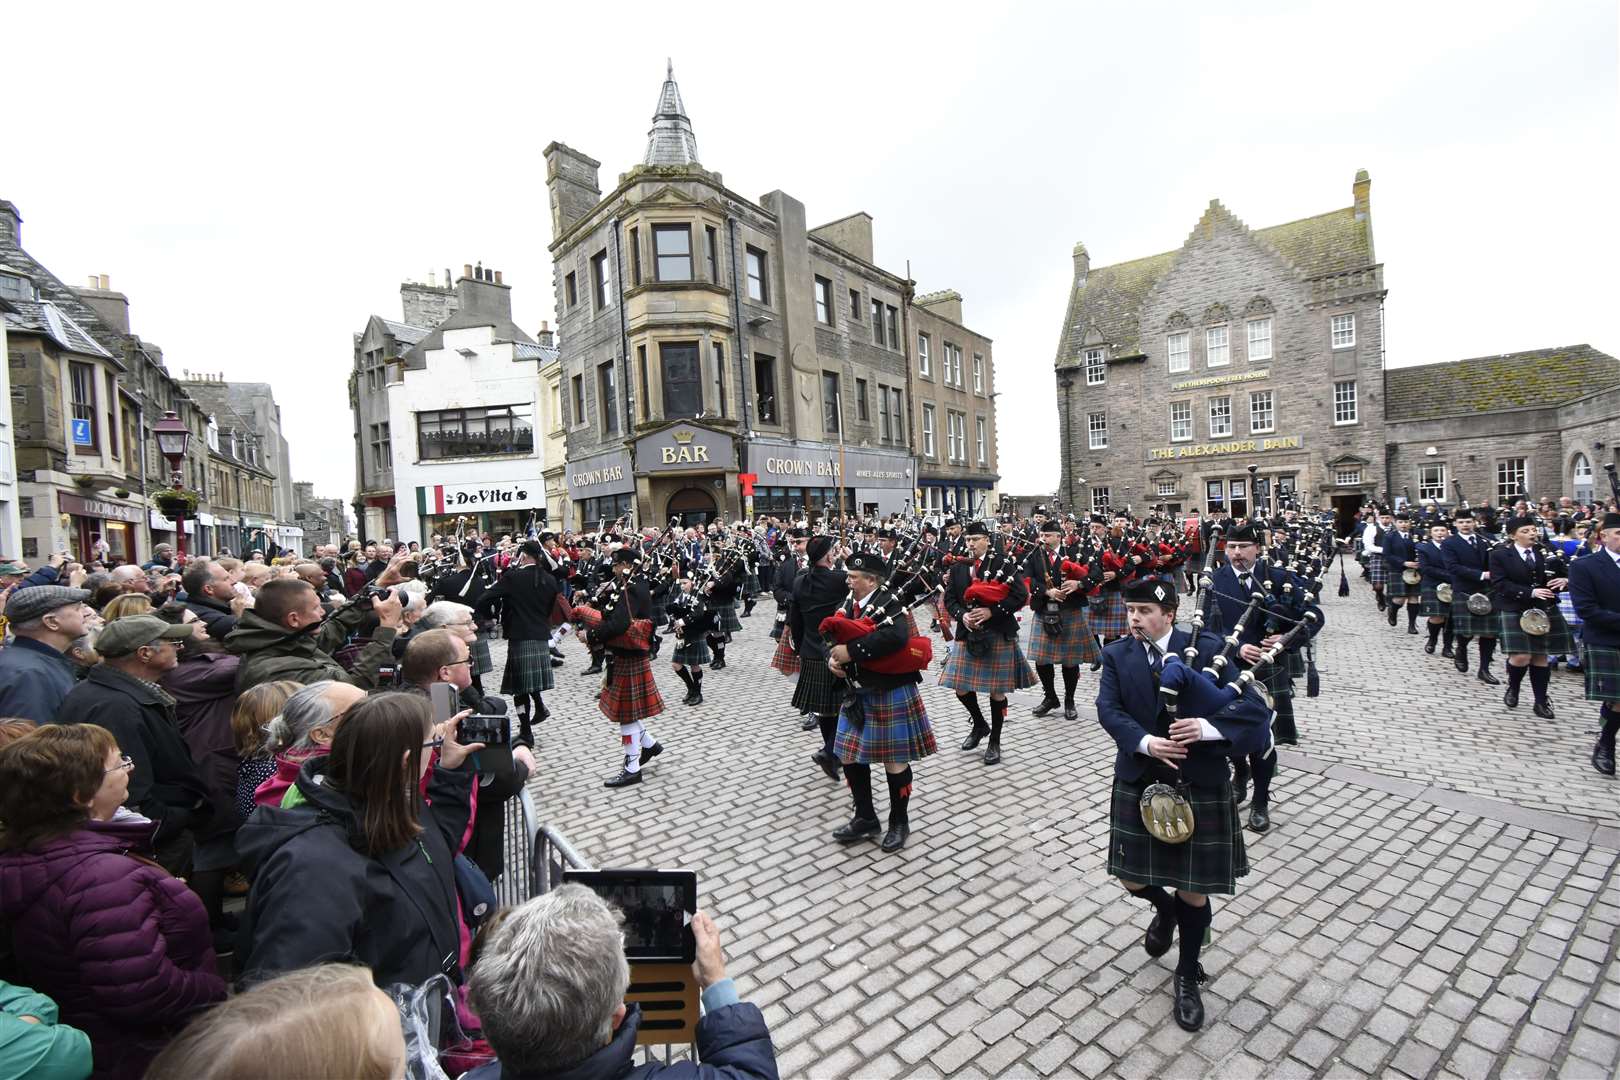 The bands in full flow watched by an admiring crowd. Picture: Noel Donaldson